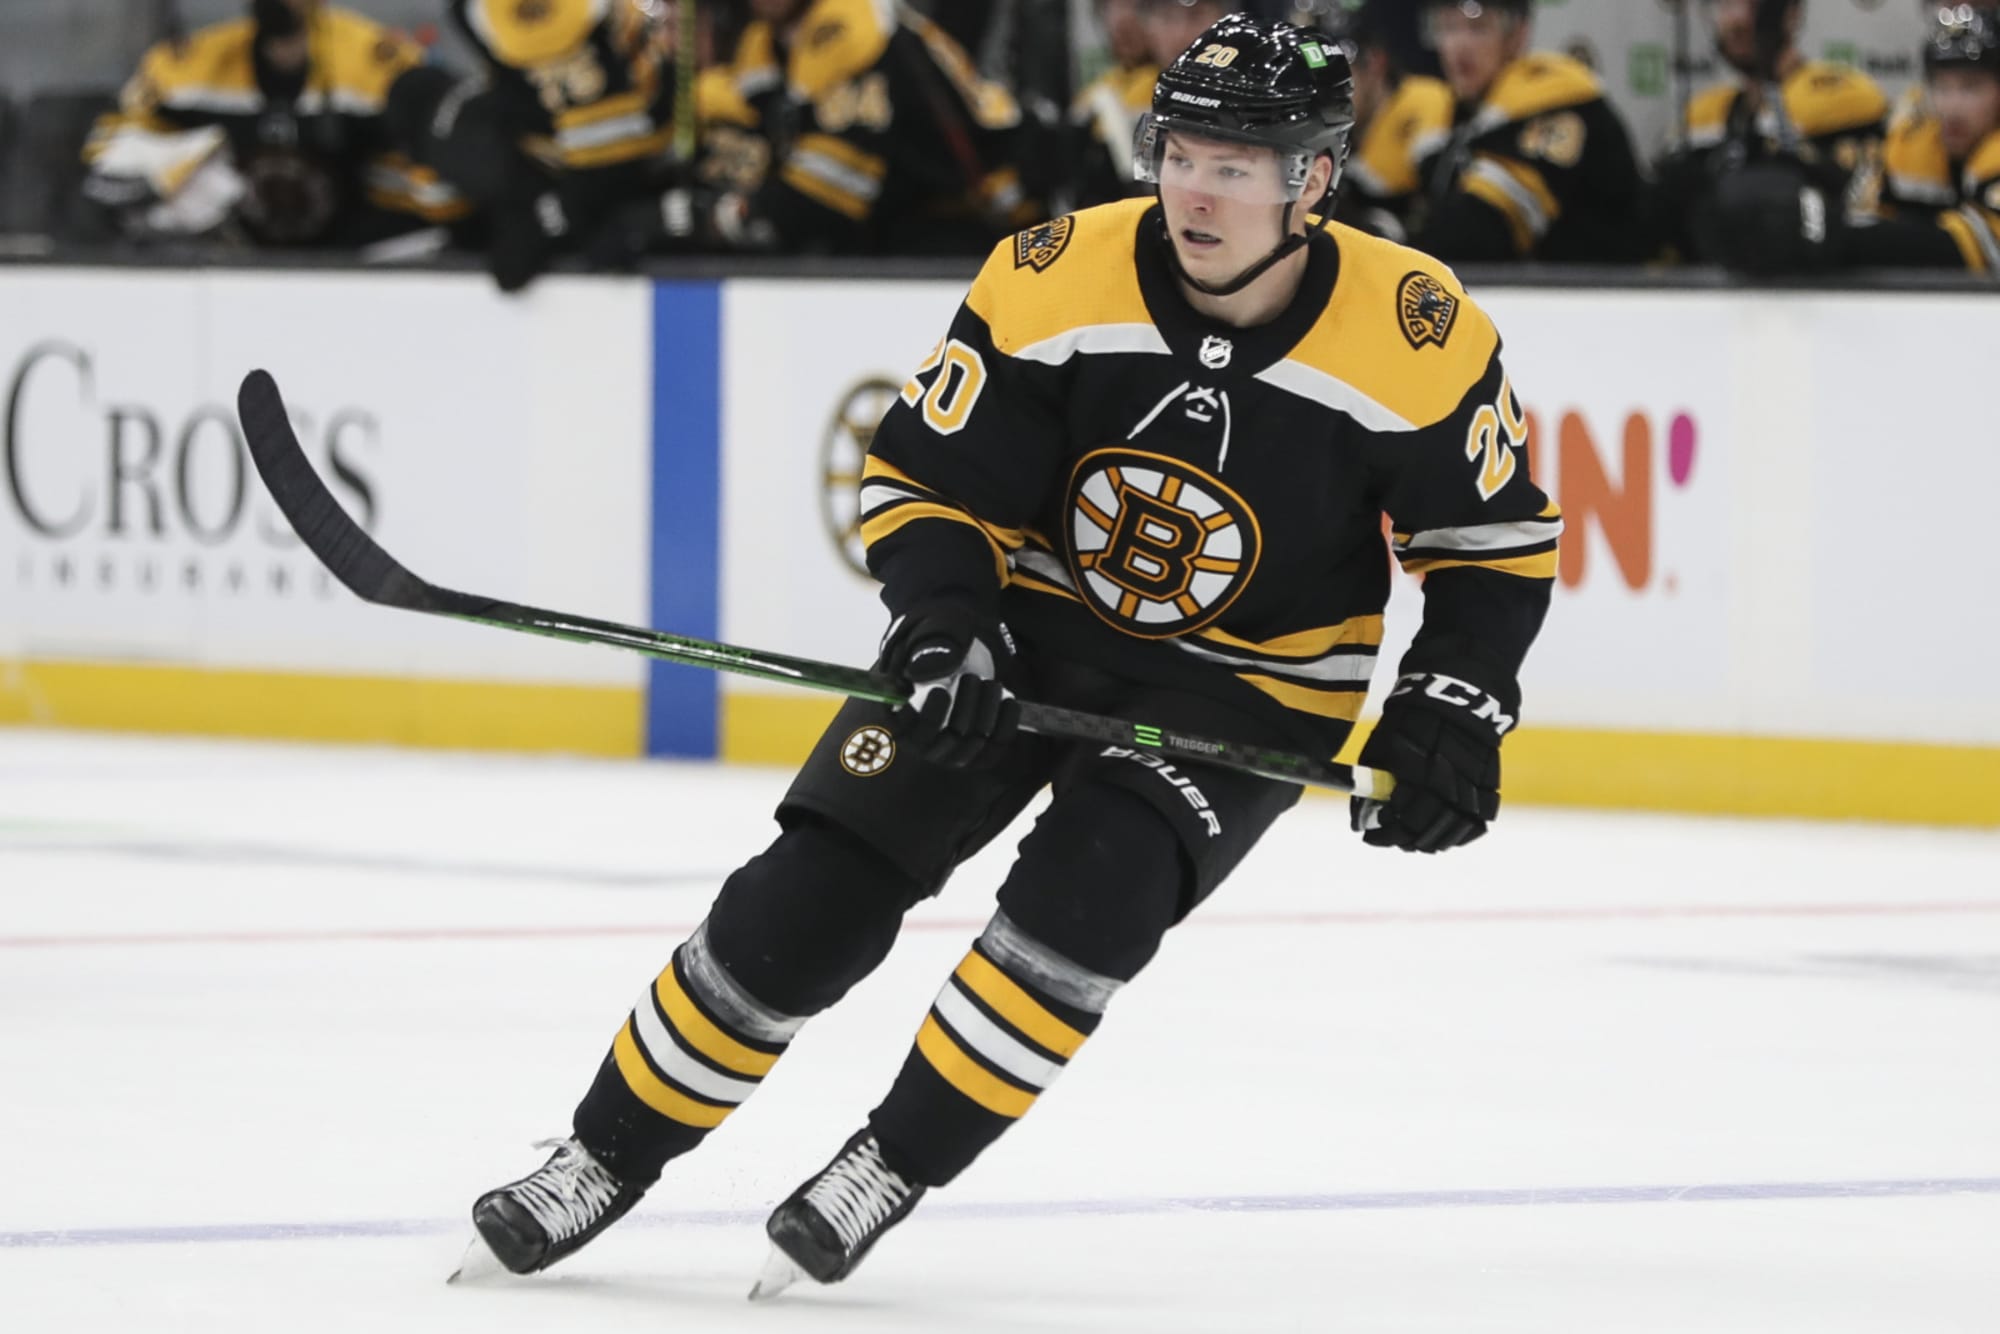 Bruins: Losing Curtis Lazar long-term would have been bad